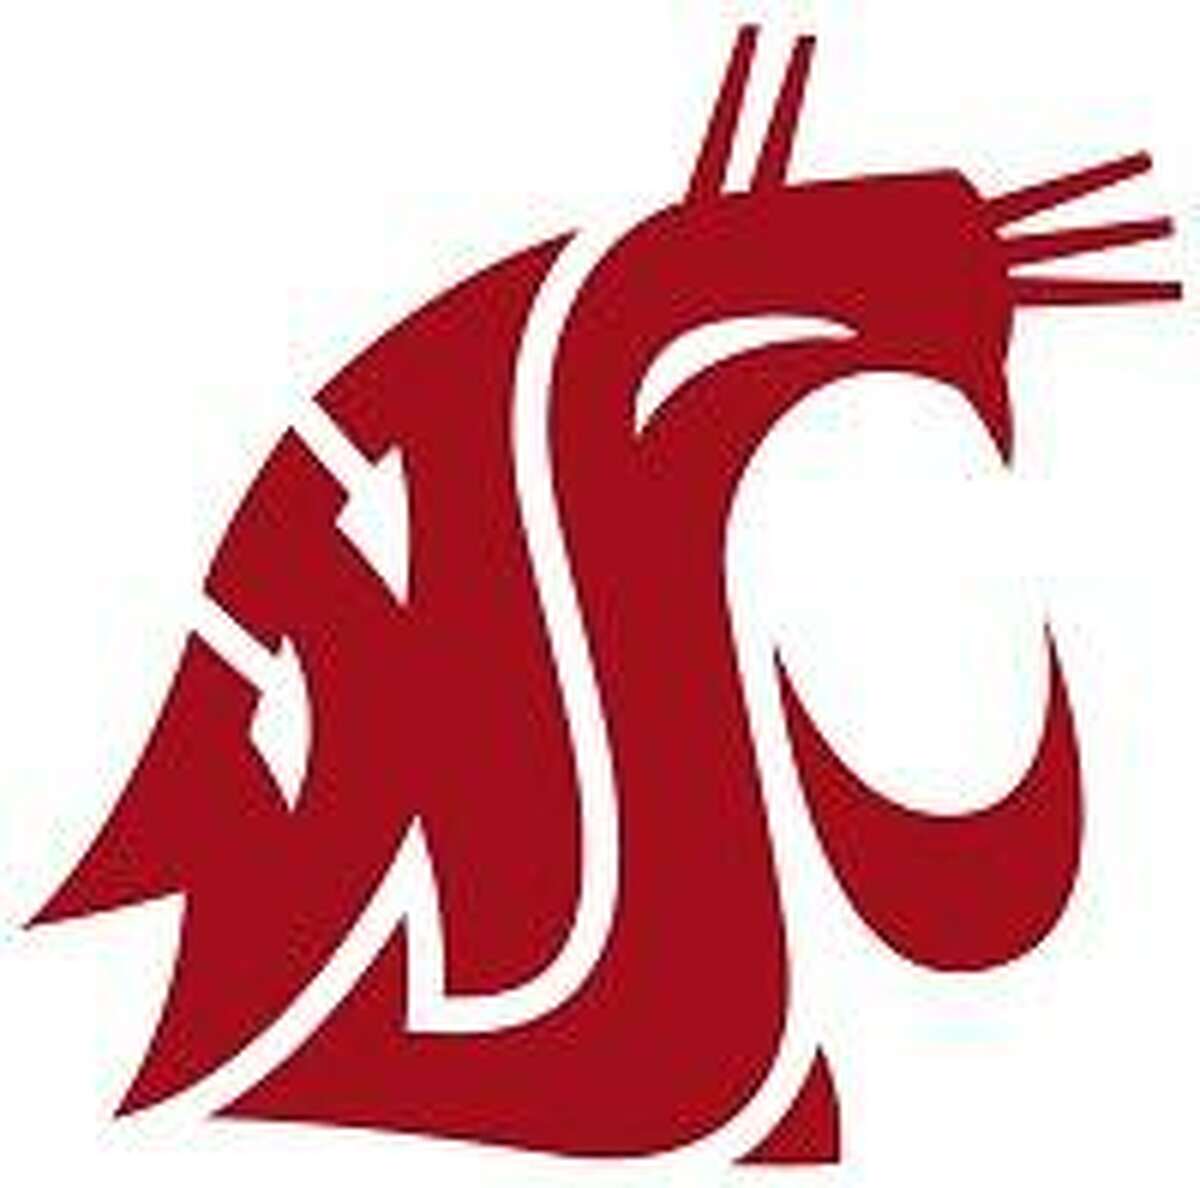 The WSU logo was designed in 1936 by Randall Johnson, an art student at WSU. 